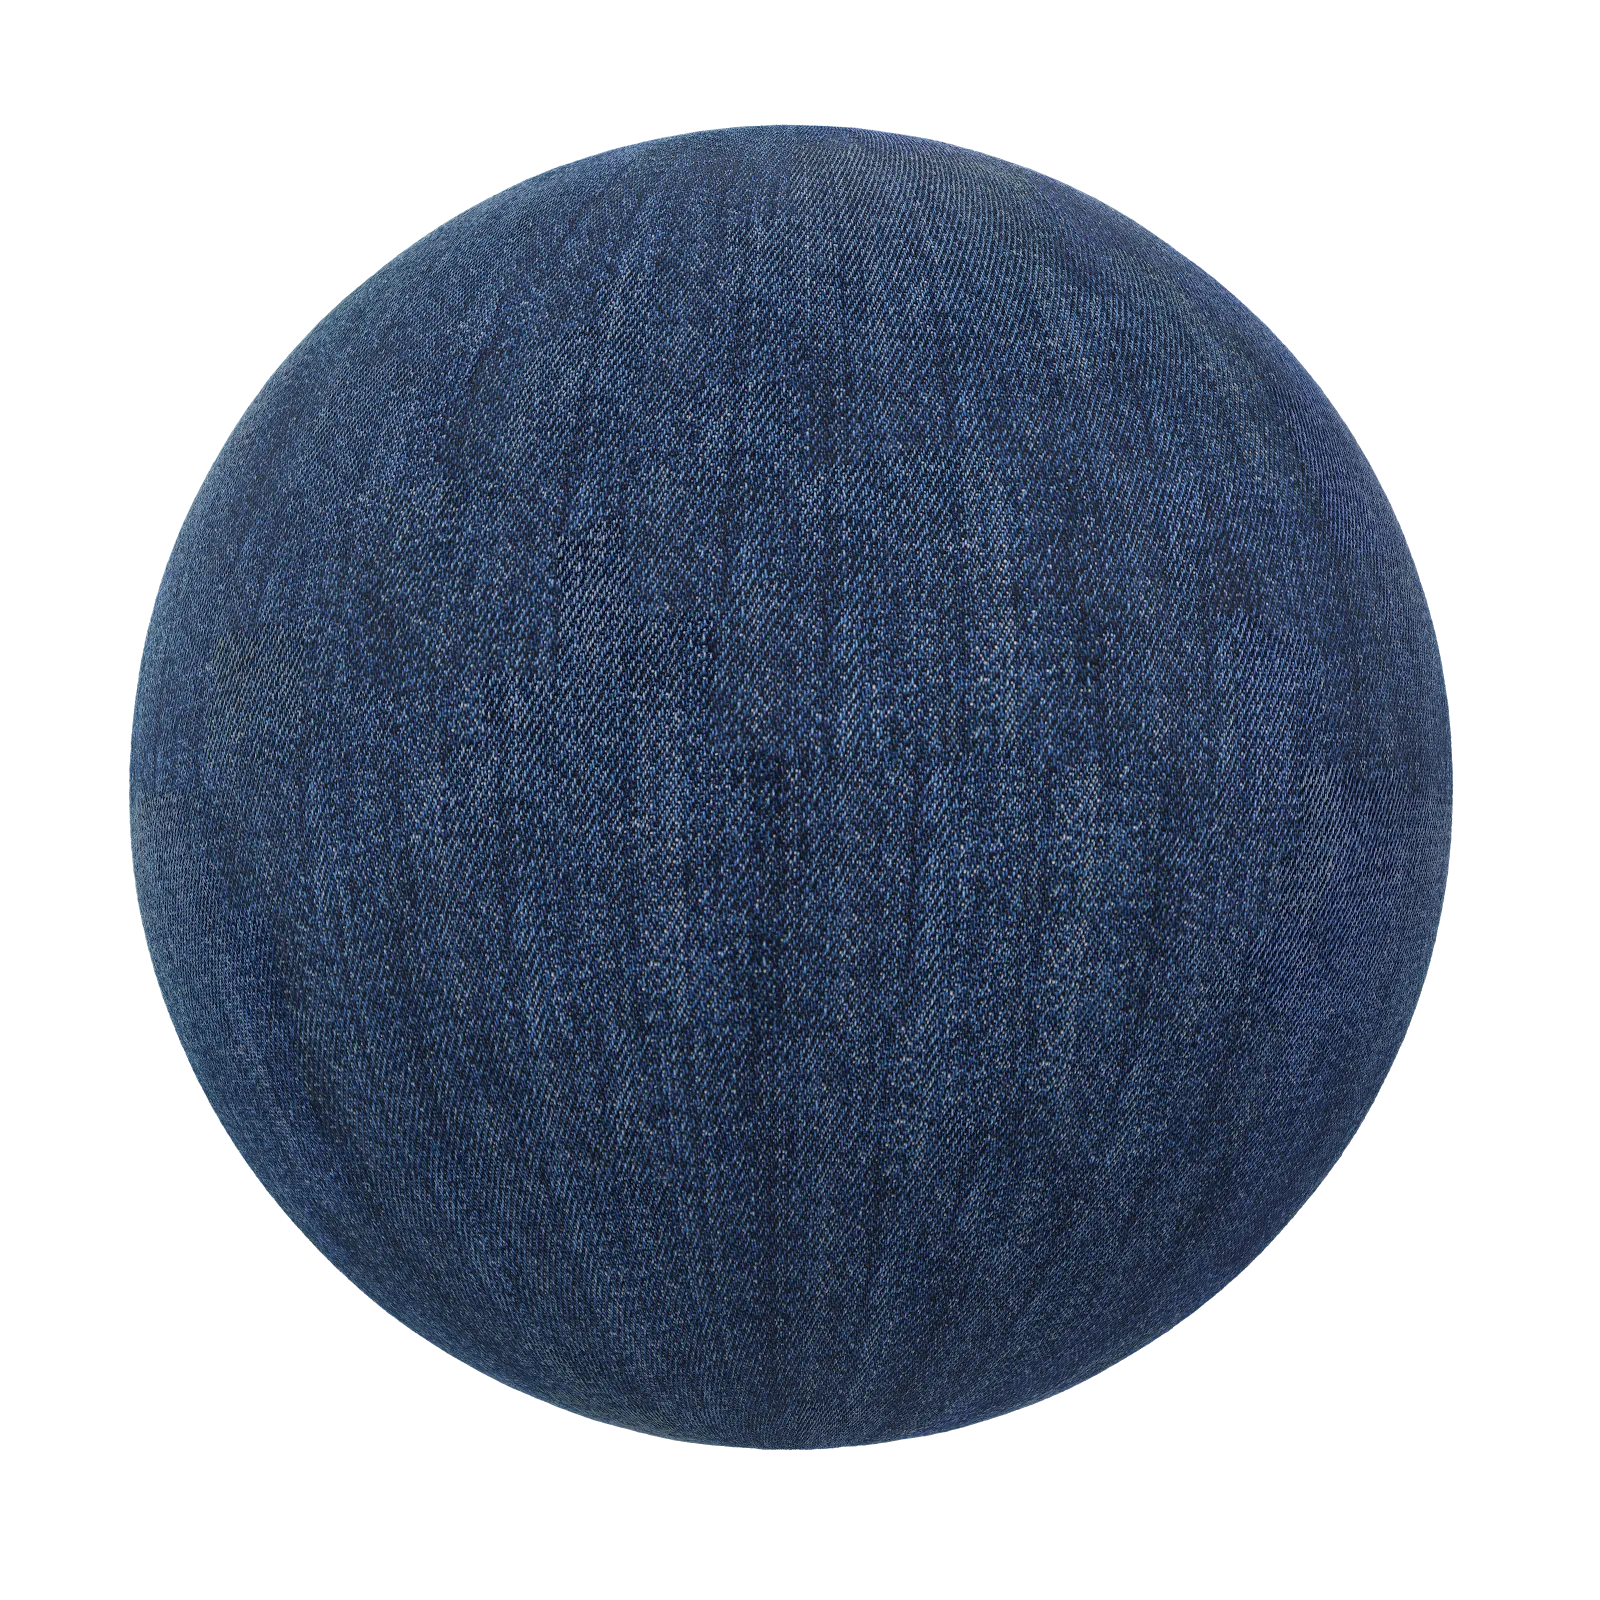 PBR CGAXIS TEXTURES – FABRICS – Blue Jeans Fabric 01